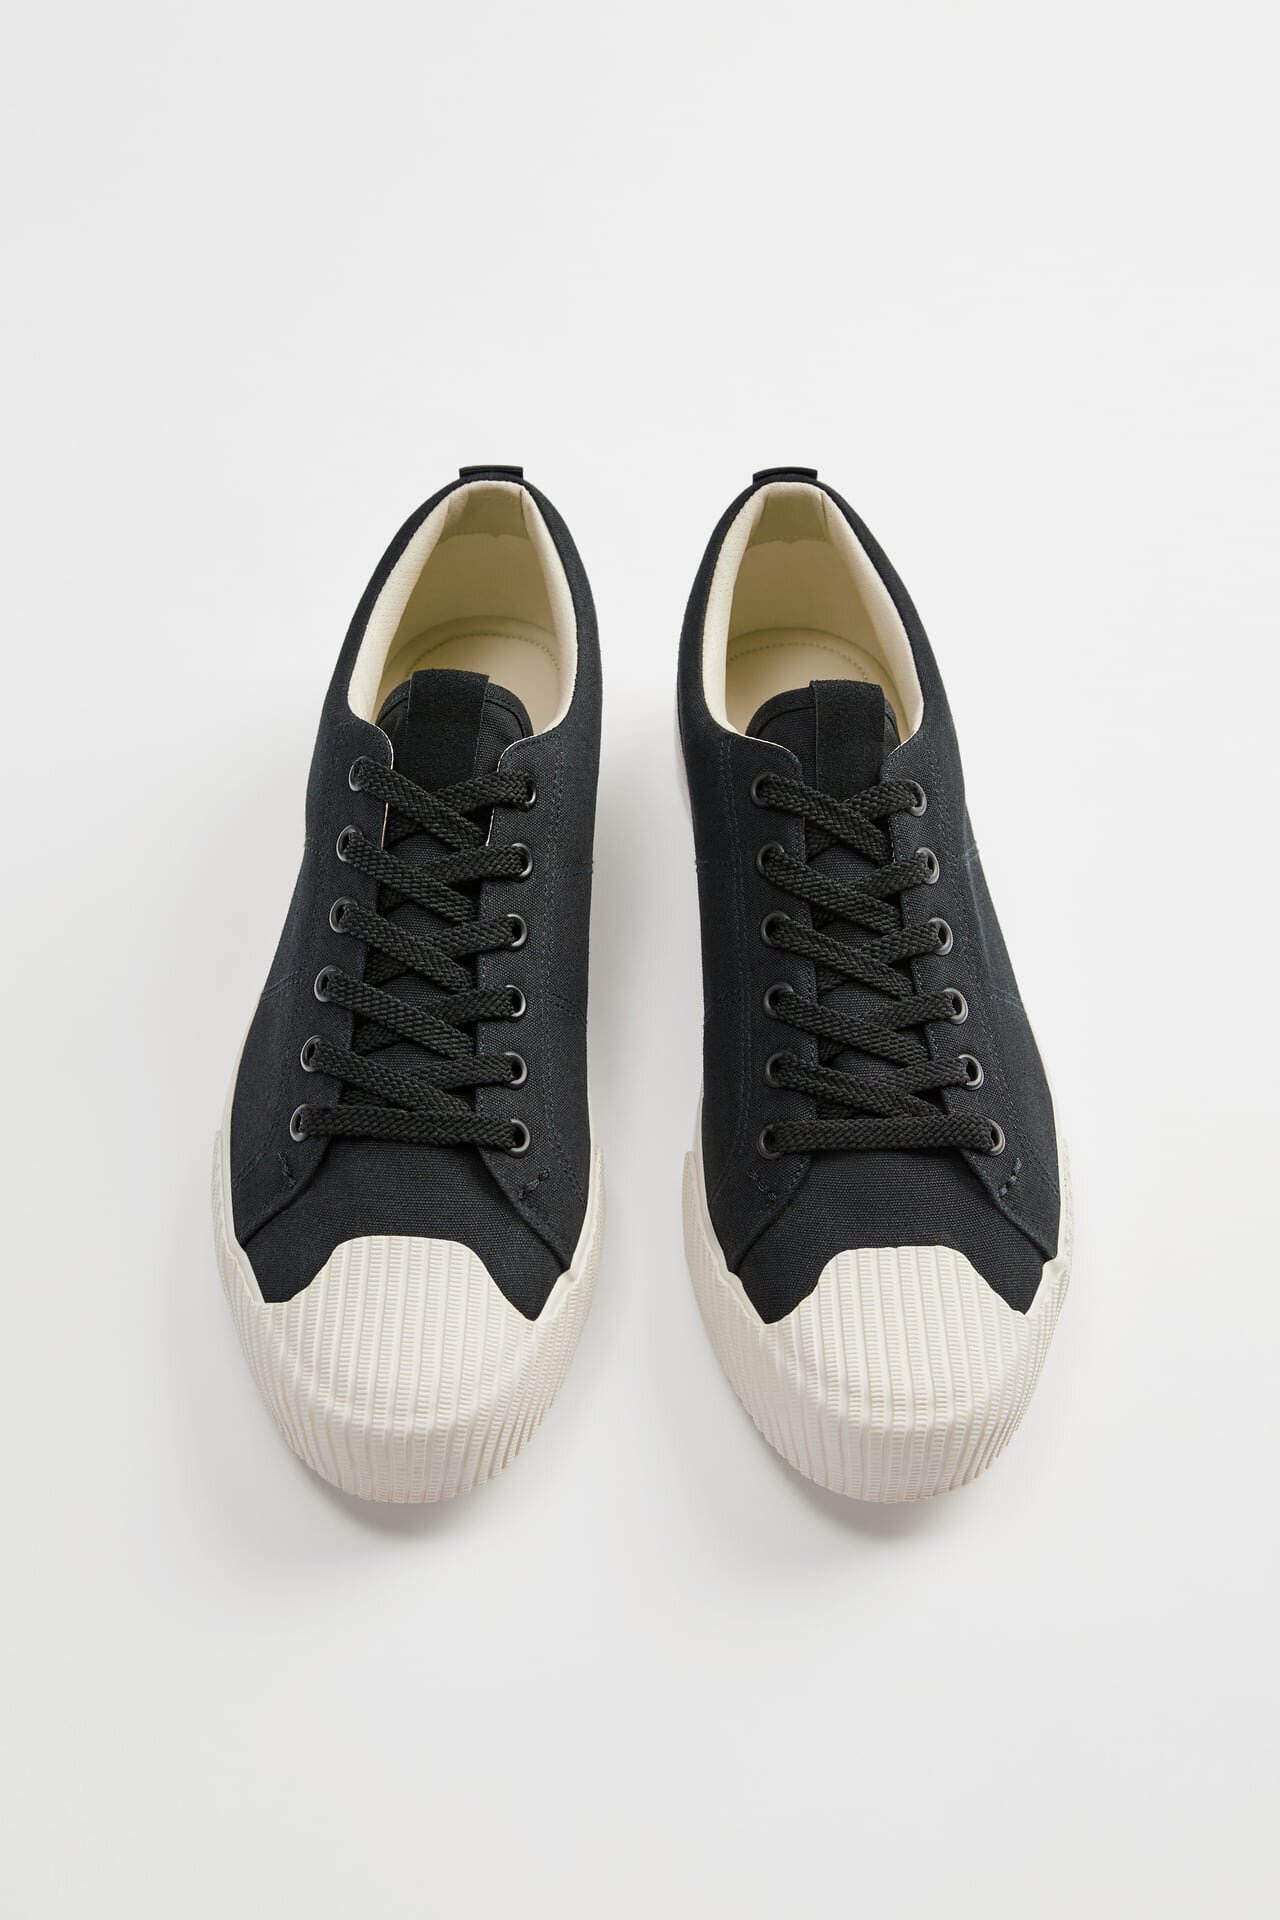 WANT - new menswear from Lacoste, AMI, Mr Porter, Acne Studios, Matches ...